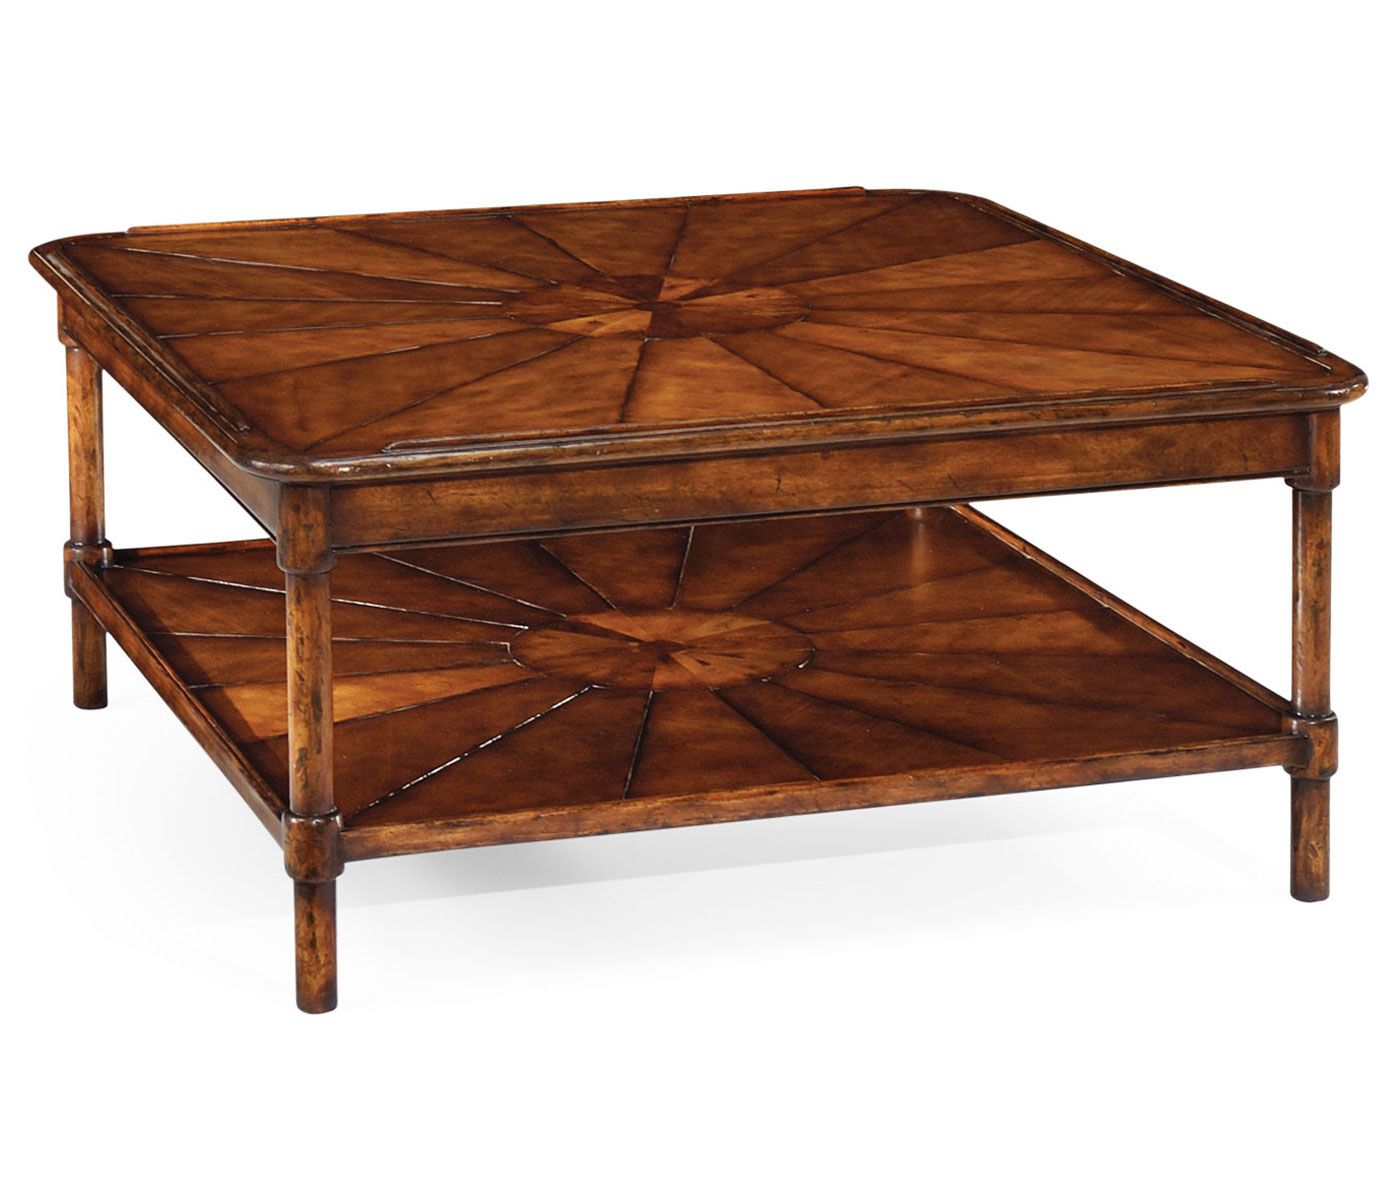 Square Rustic Walnut Coffee Table With Regard To Walnut Wood And Gold Metal Coffee Tables (View 9 of 15)